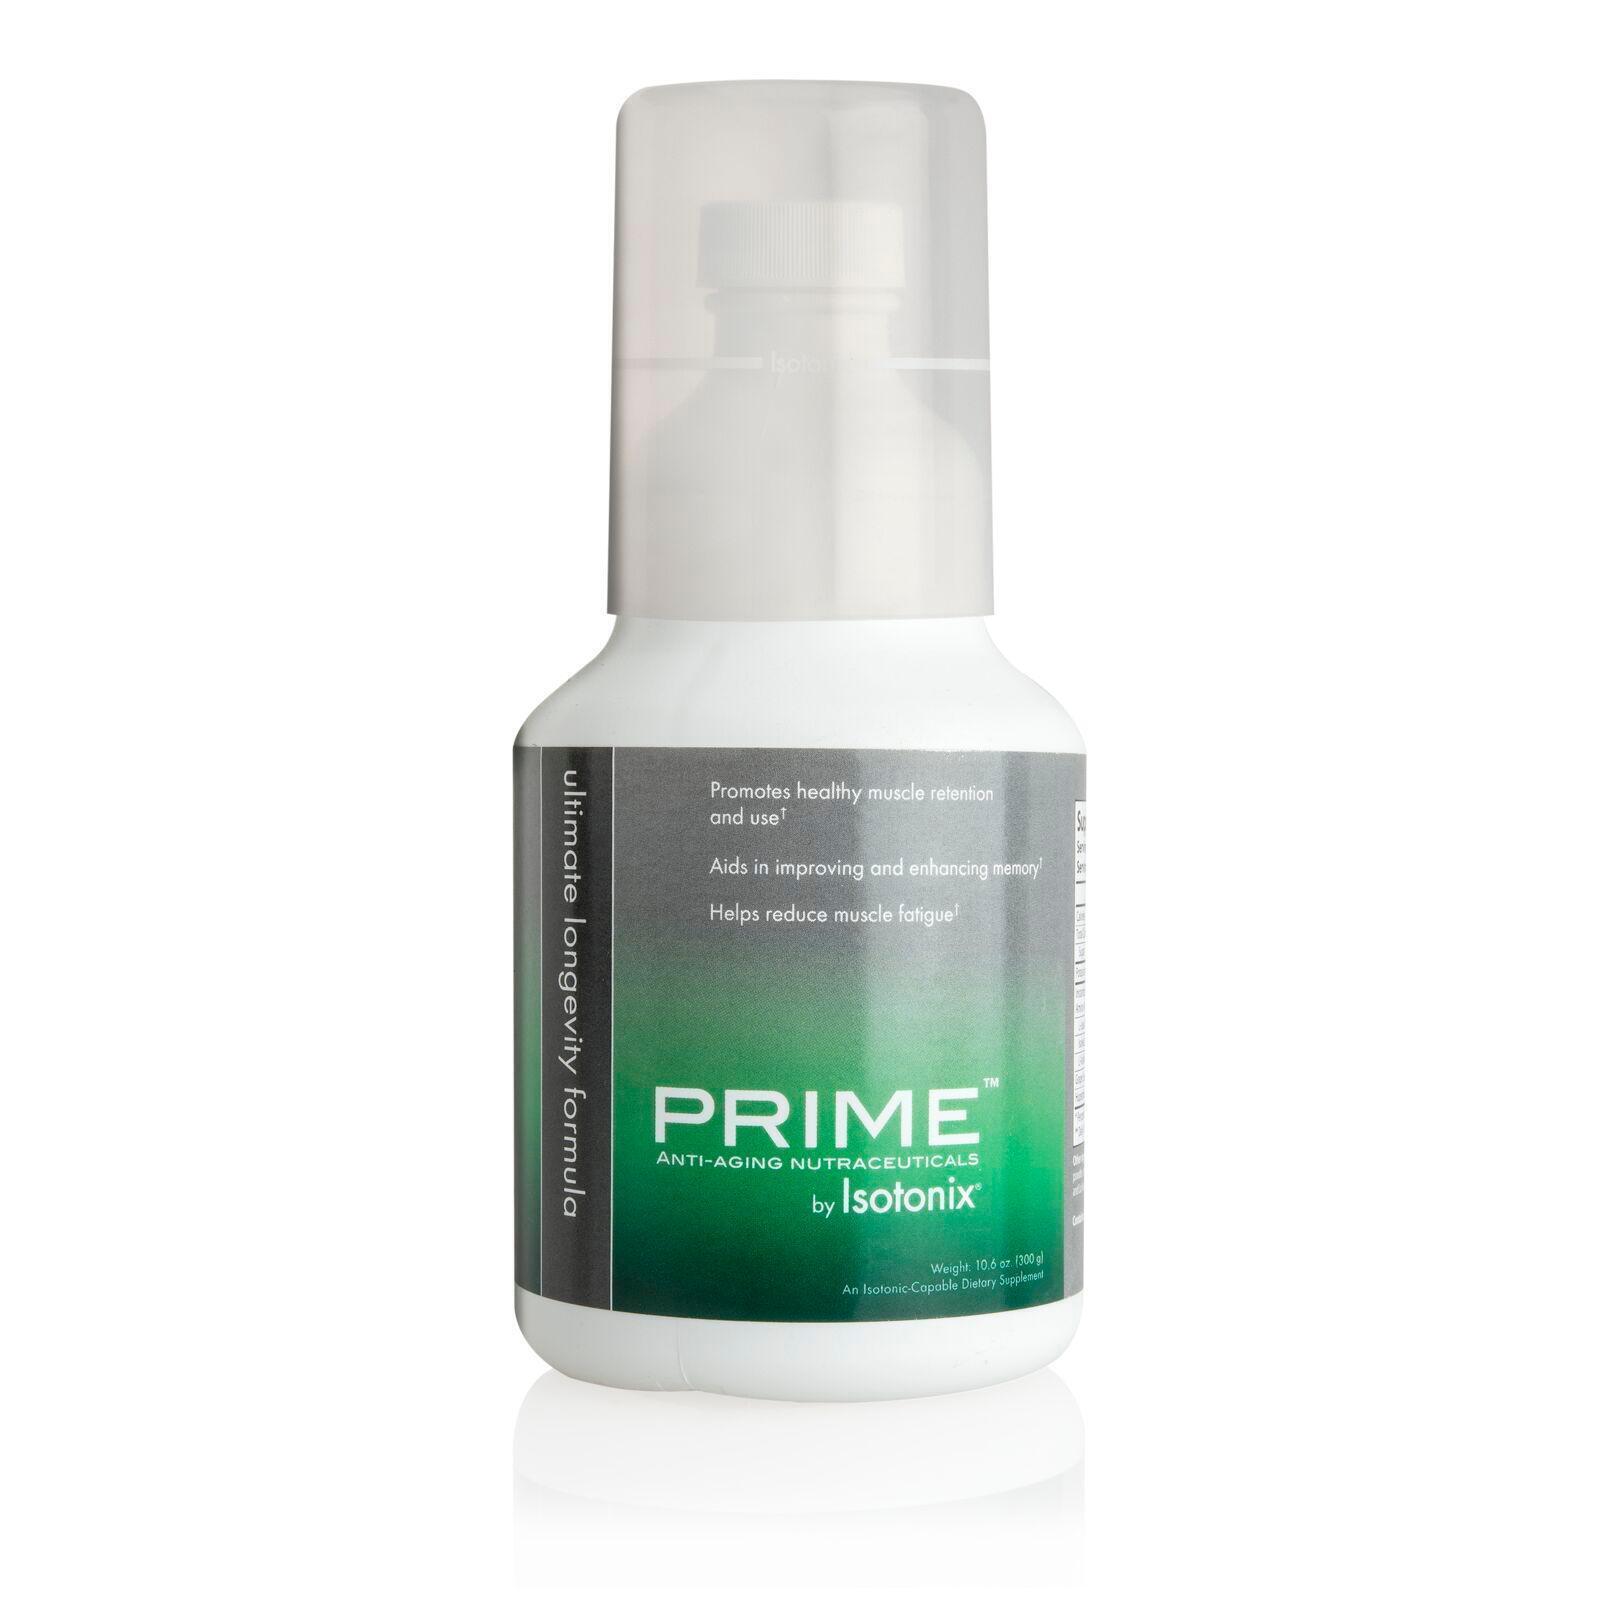 Prime Ultimate Longevity Formula by Isotonix,Essentials, Product Tested no detectable GMO